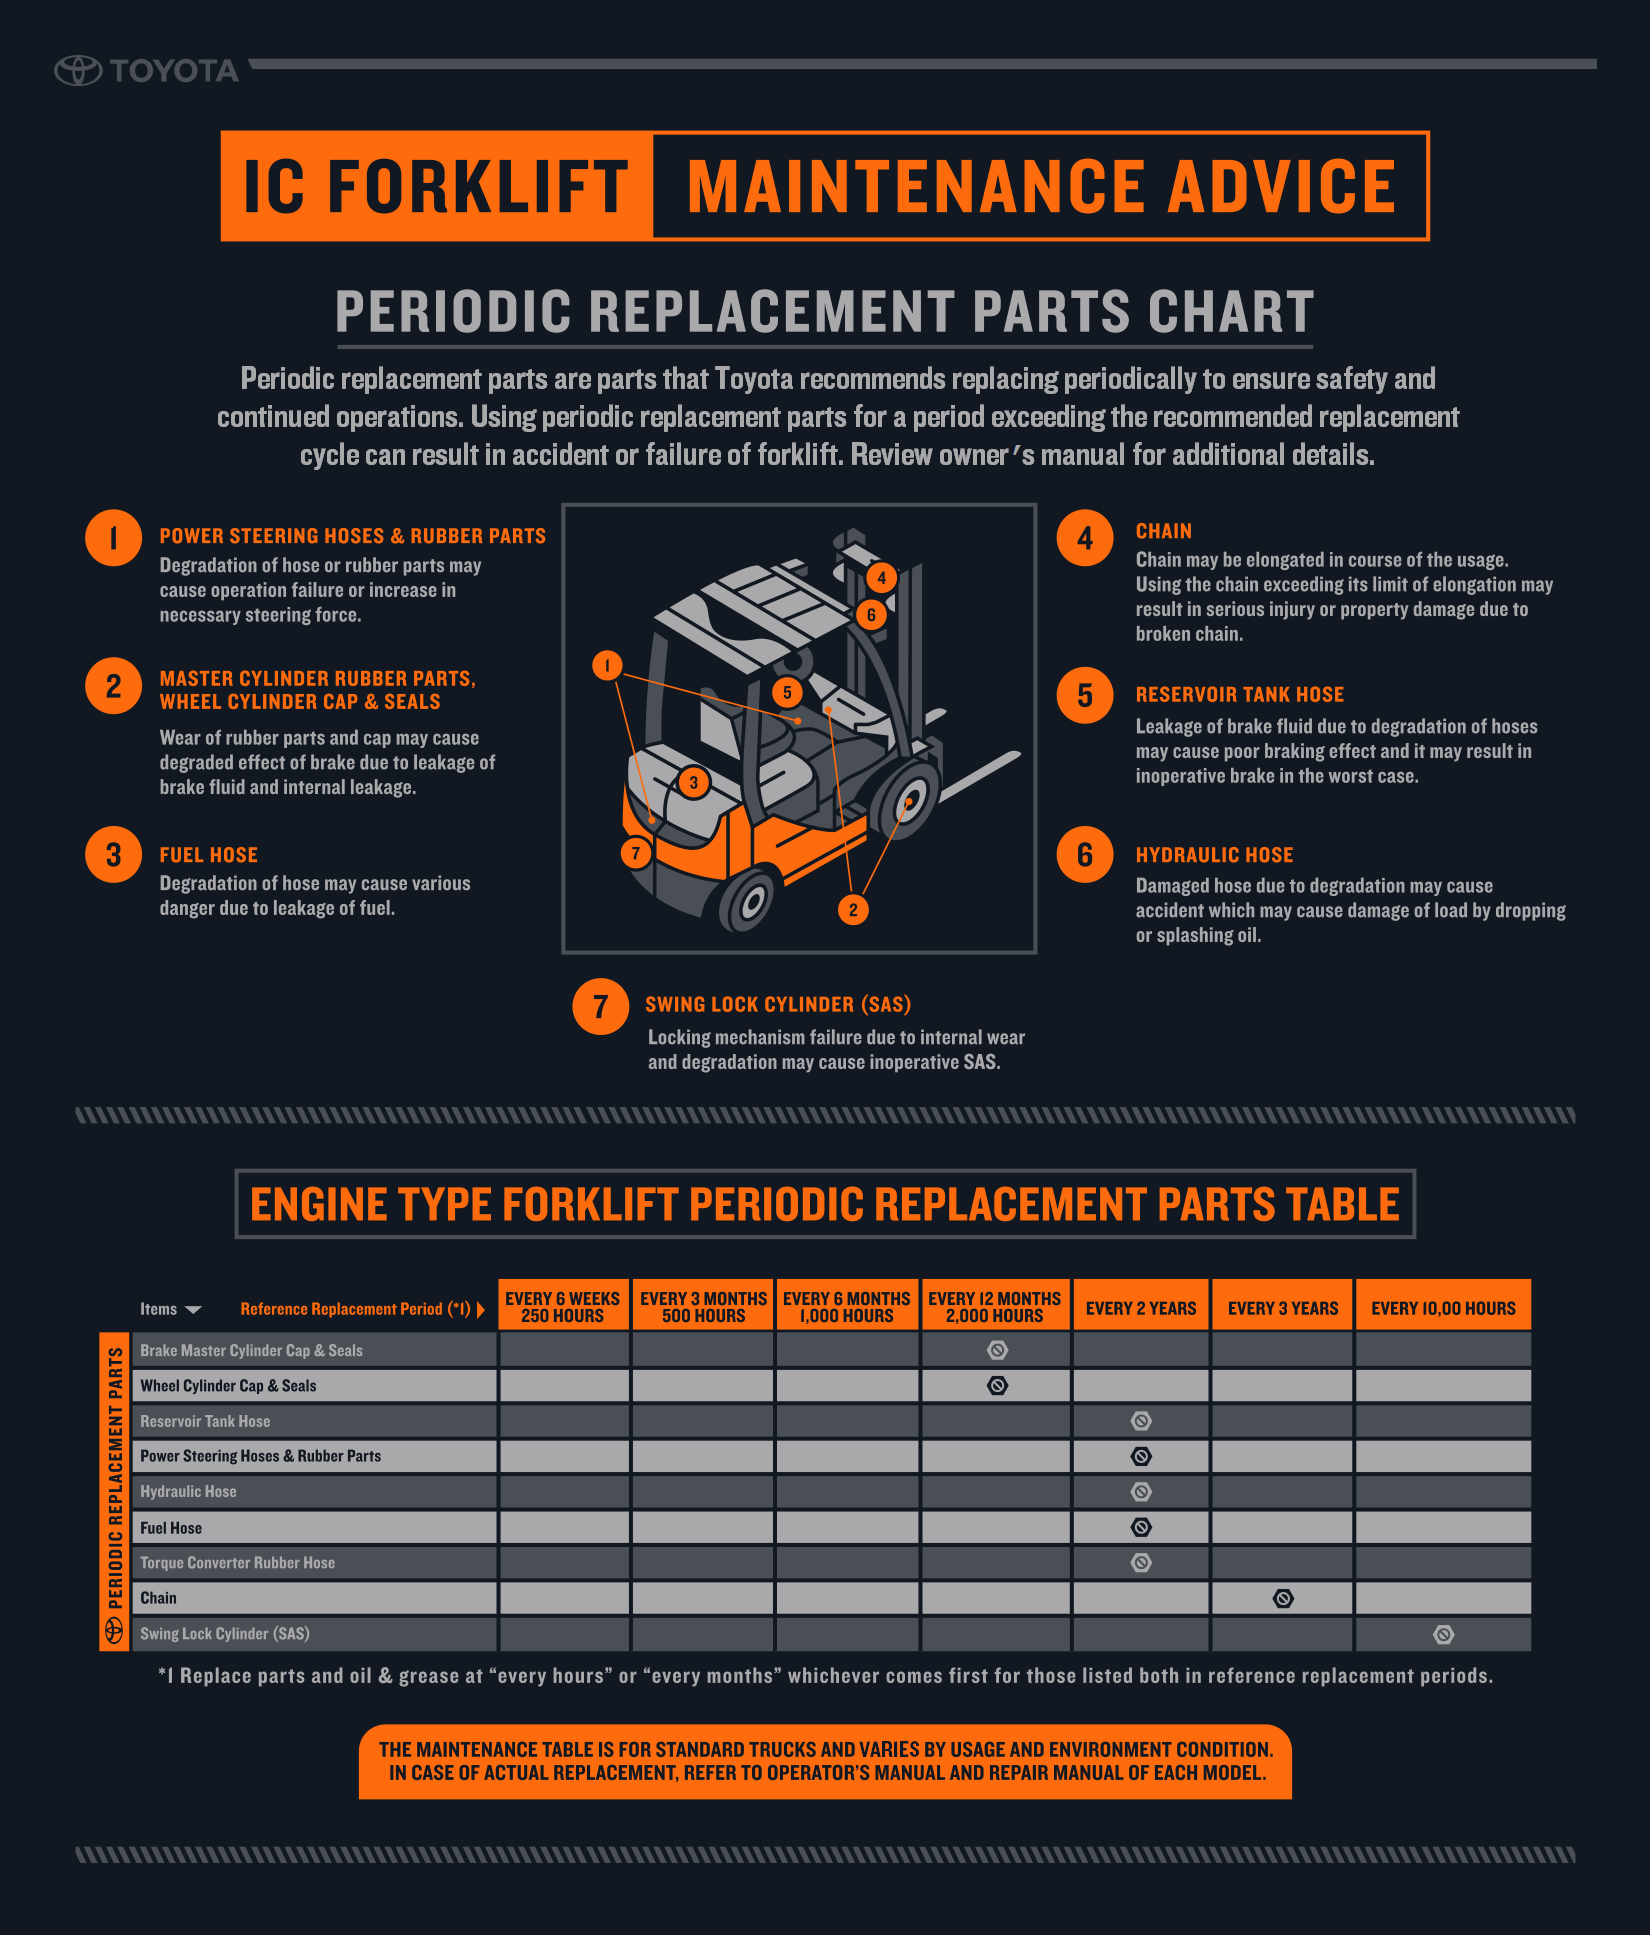 IC-IC-Forklift-Periodic-Replacement-Parts-Infographic